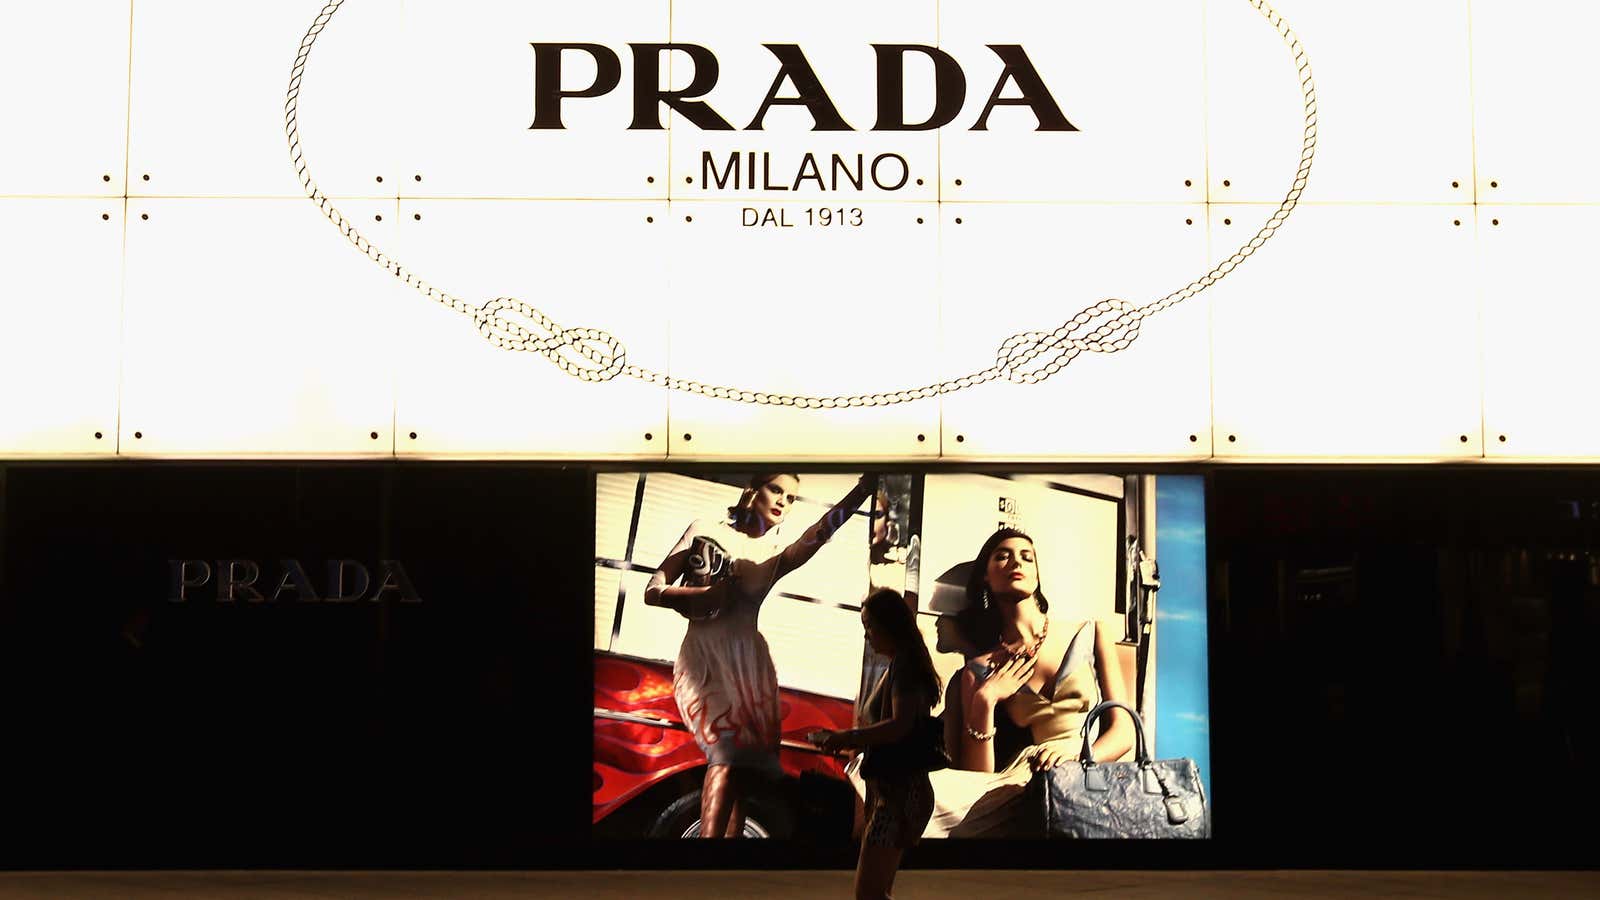 Chinese customers just don’t love Prada like they used to.